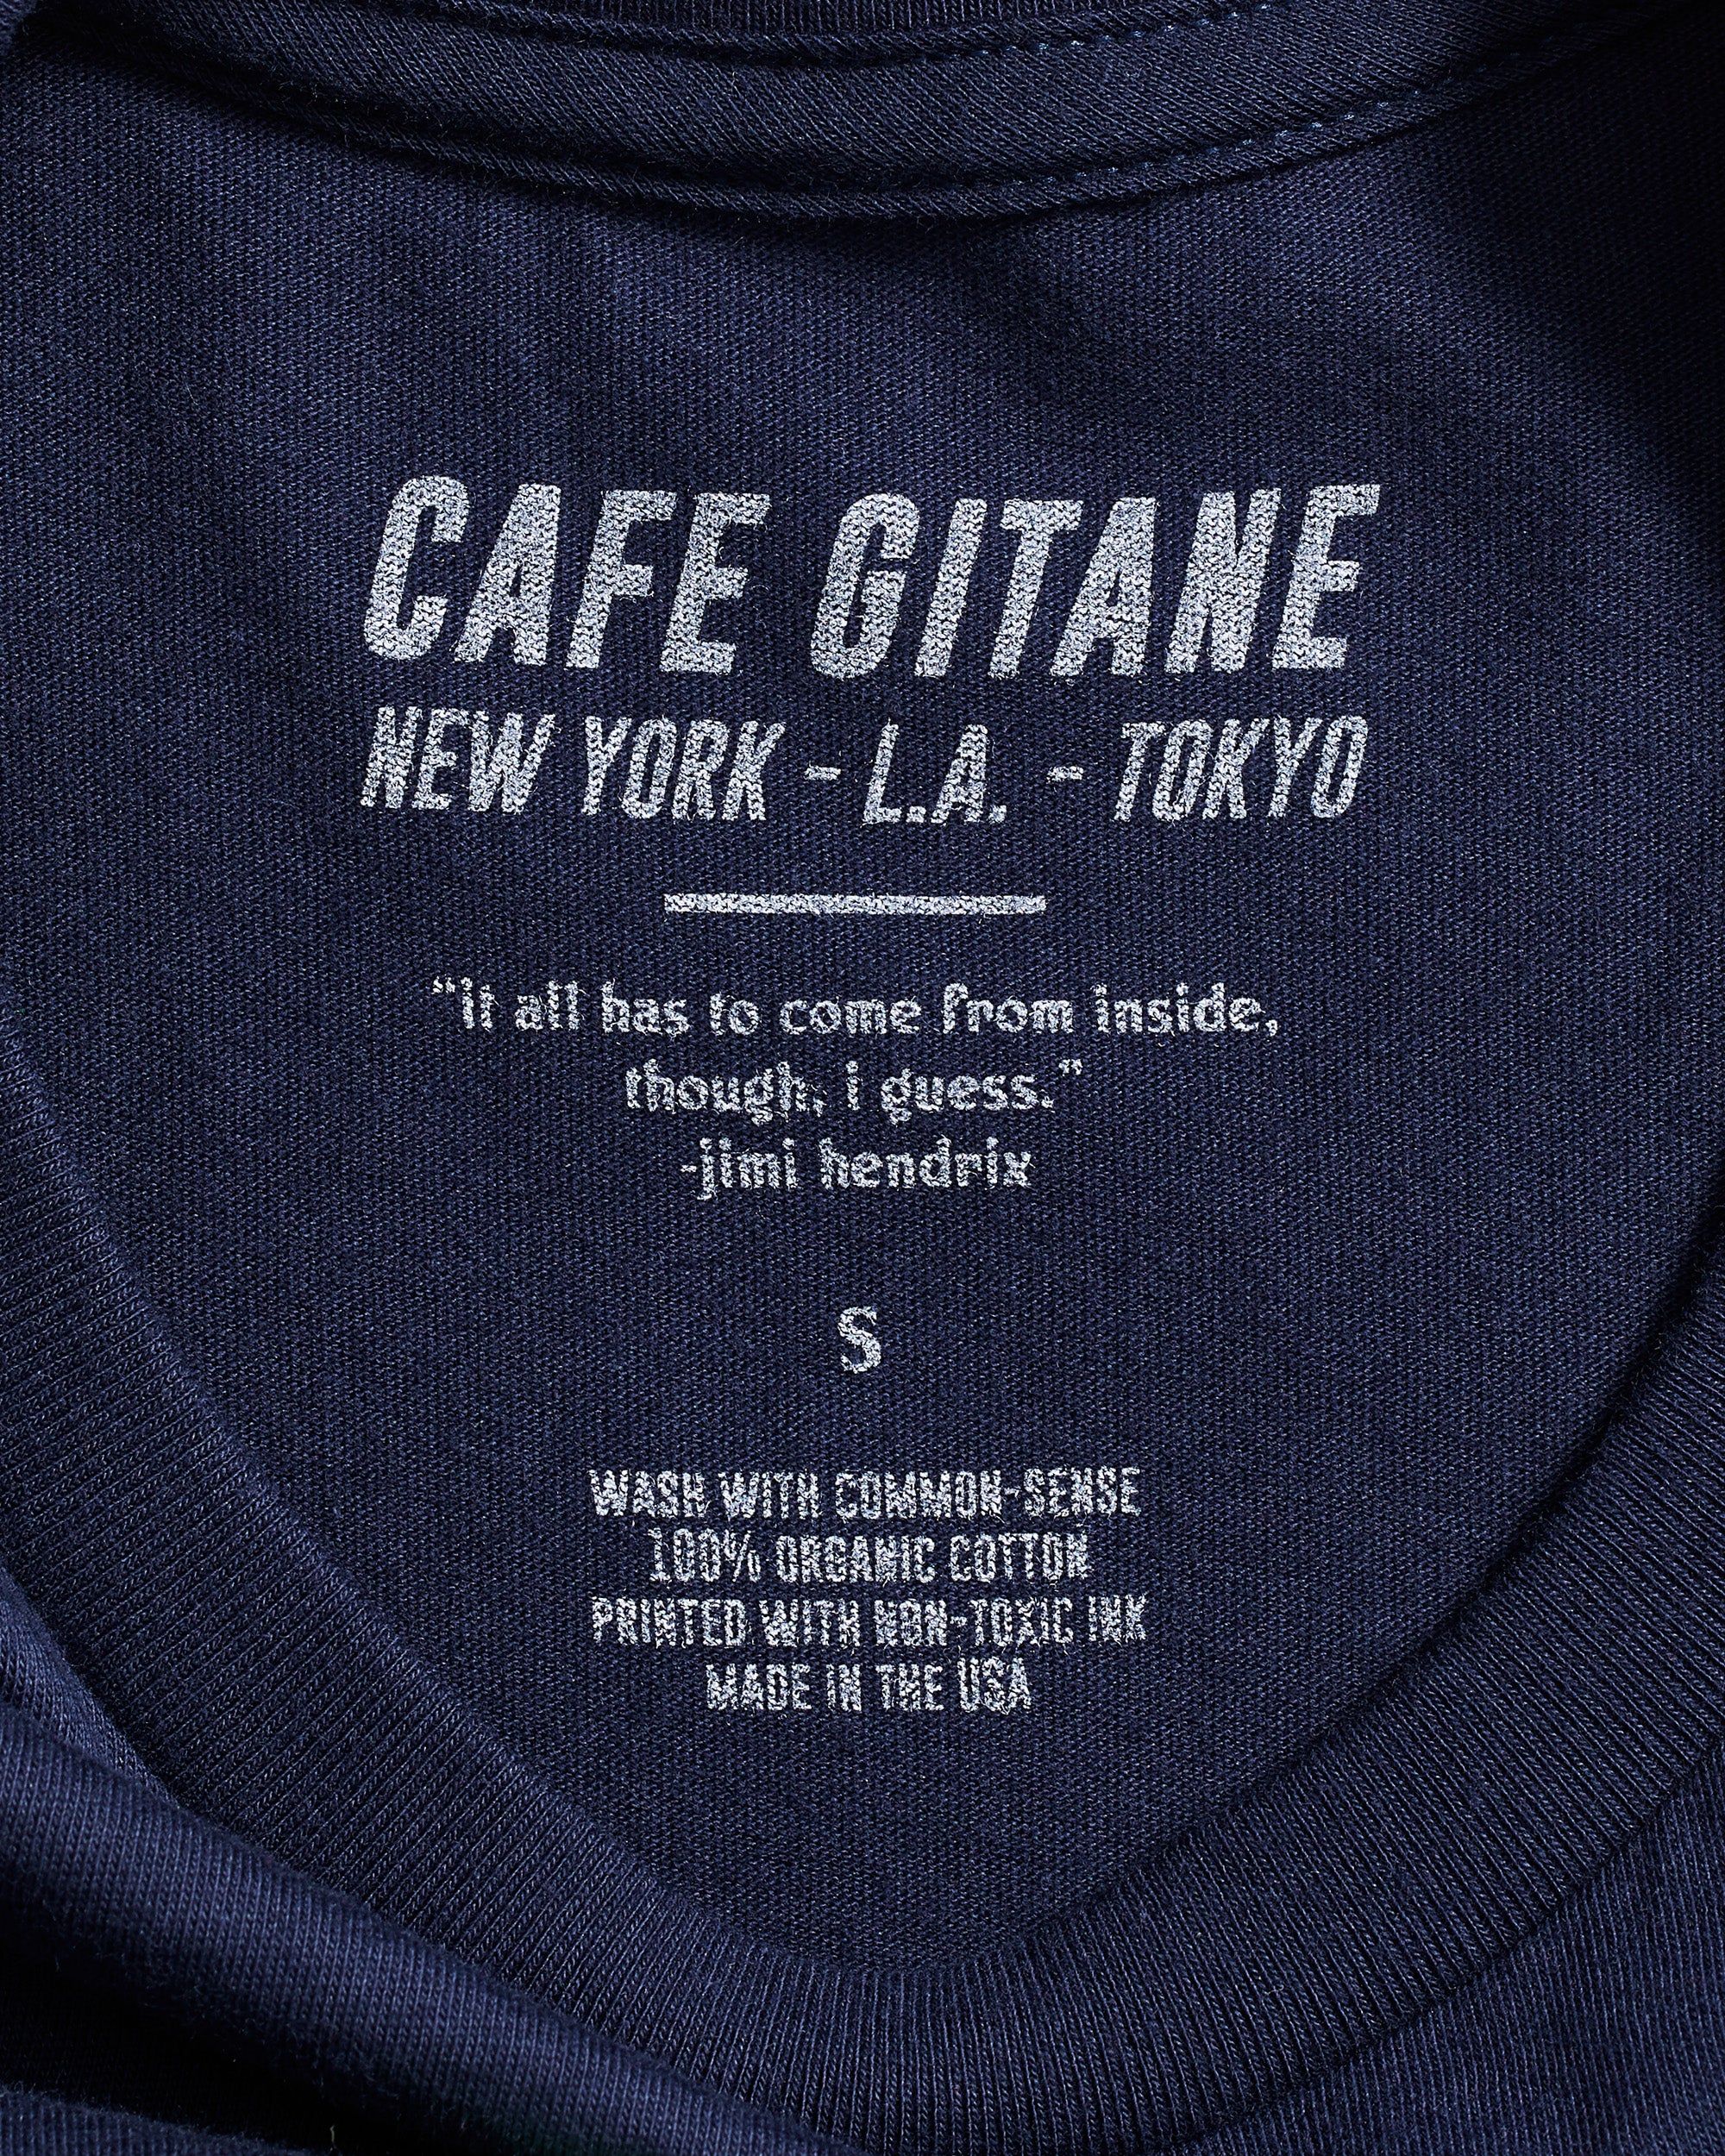 The Cafe Gitane 100% organic cotton t-shirt in navy blue has a printed inside tag. It show the care instruction, that it is made in the USA and includes a Jimi Hendrix Quote.  It also has the Cafe Gitane logo and stated the cities it has locations in: New York, Los Angeles, and Tokyo. 